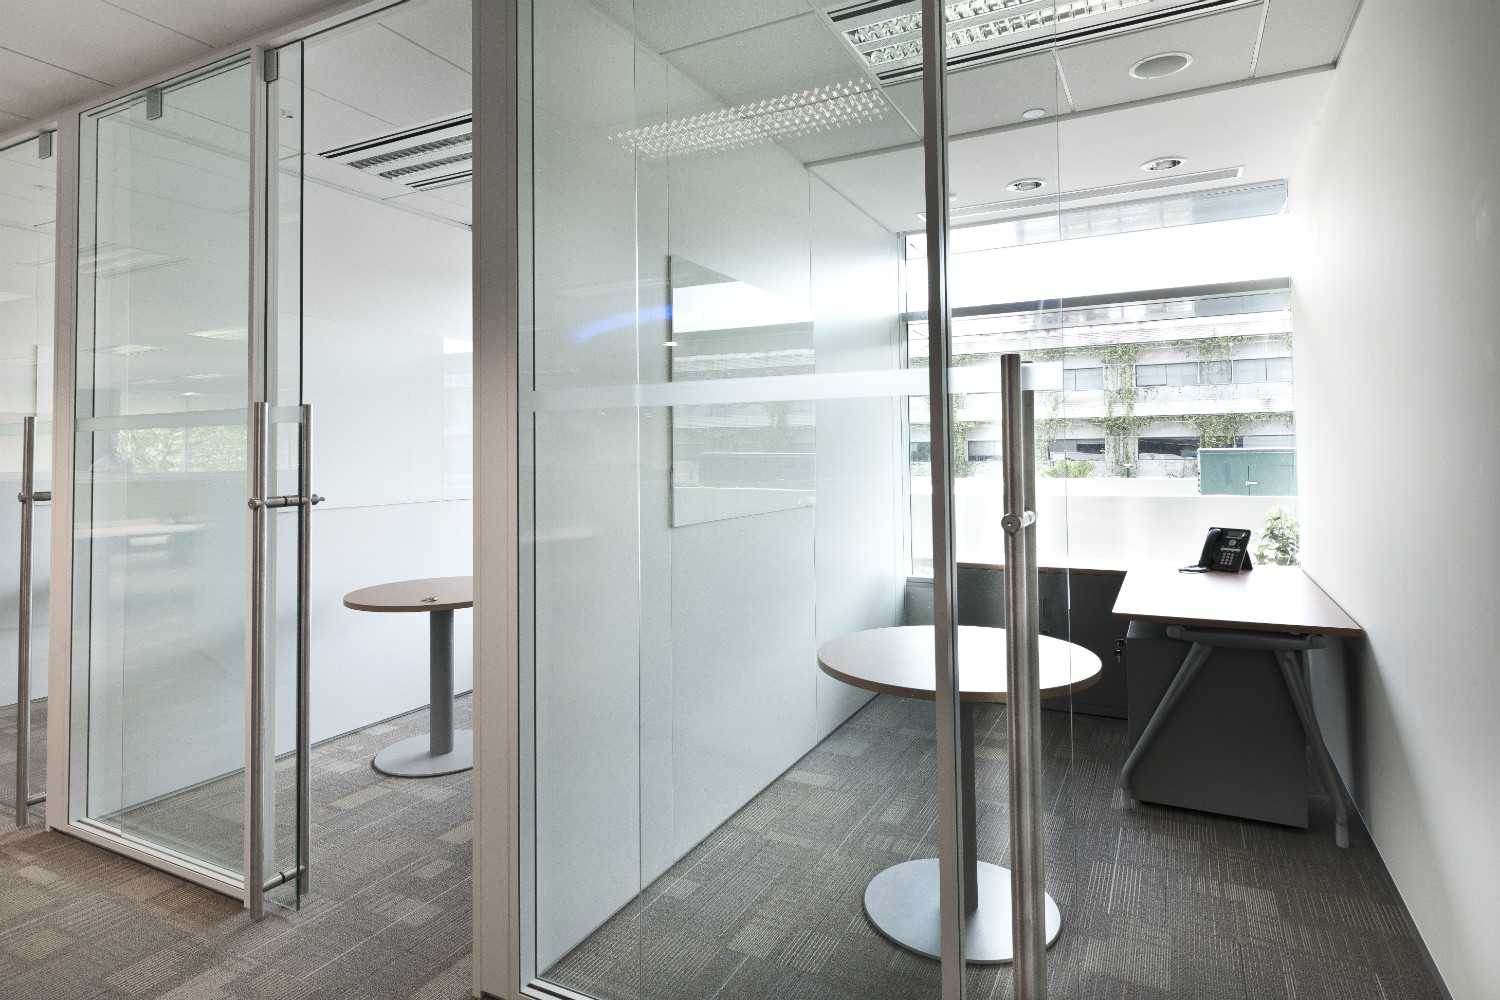 Manulife South-East Asia - Sliding doors